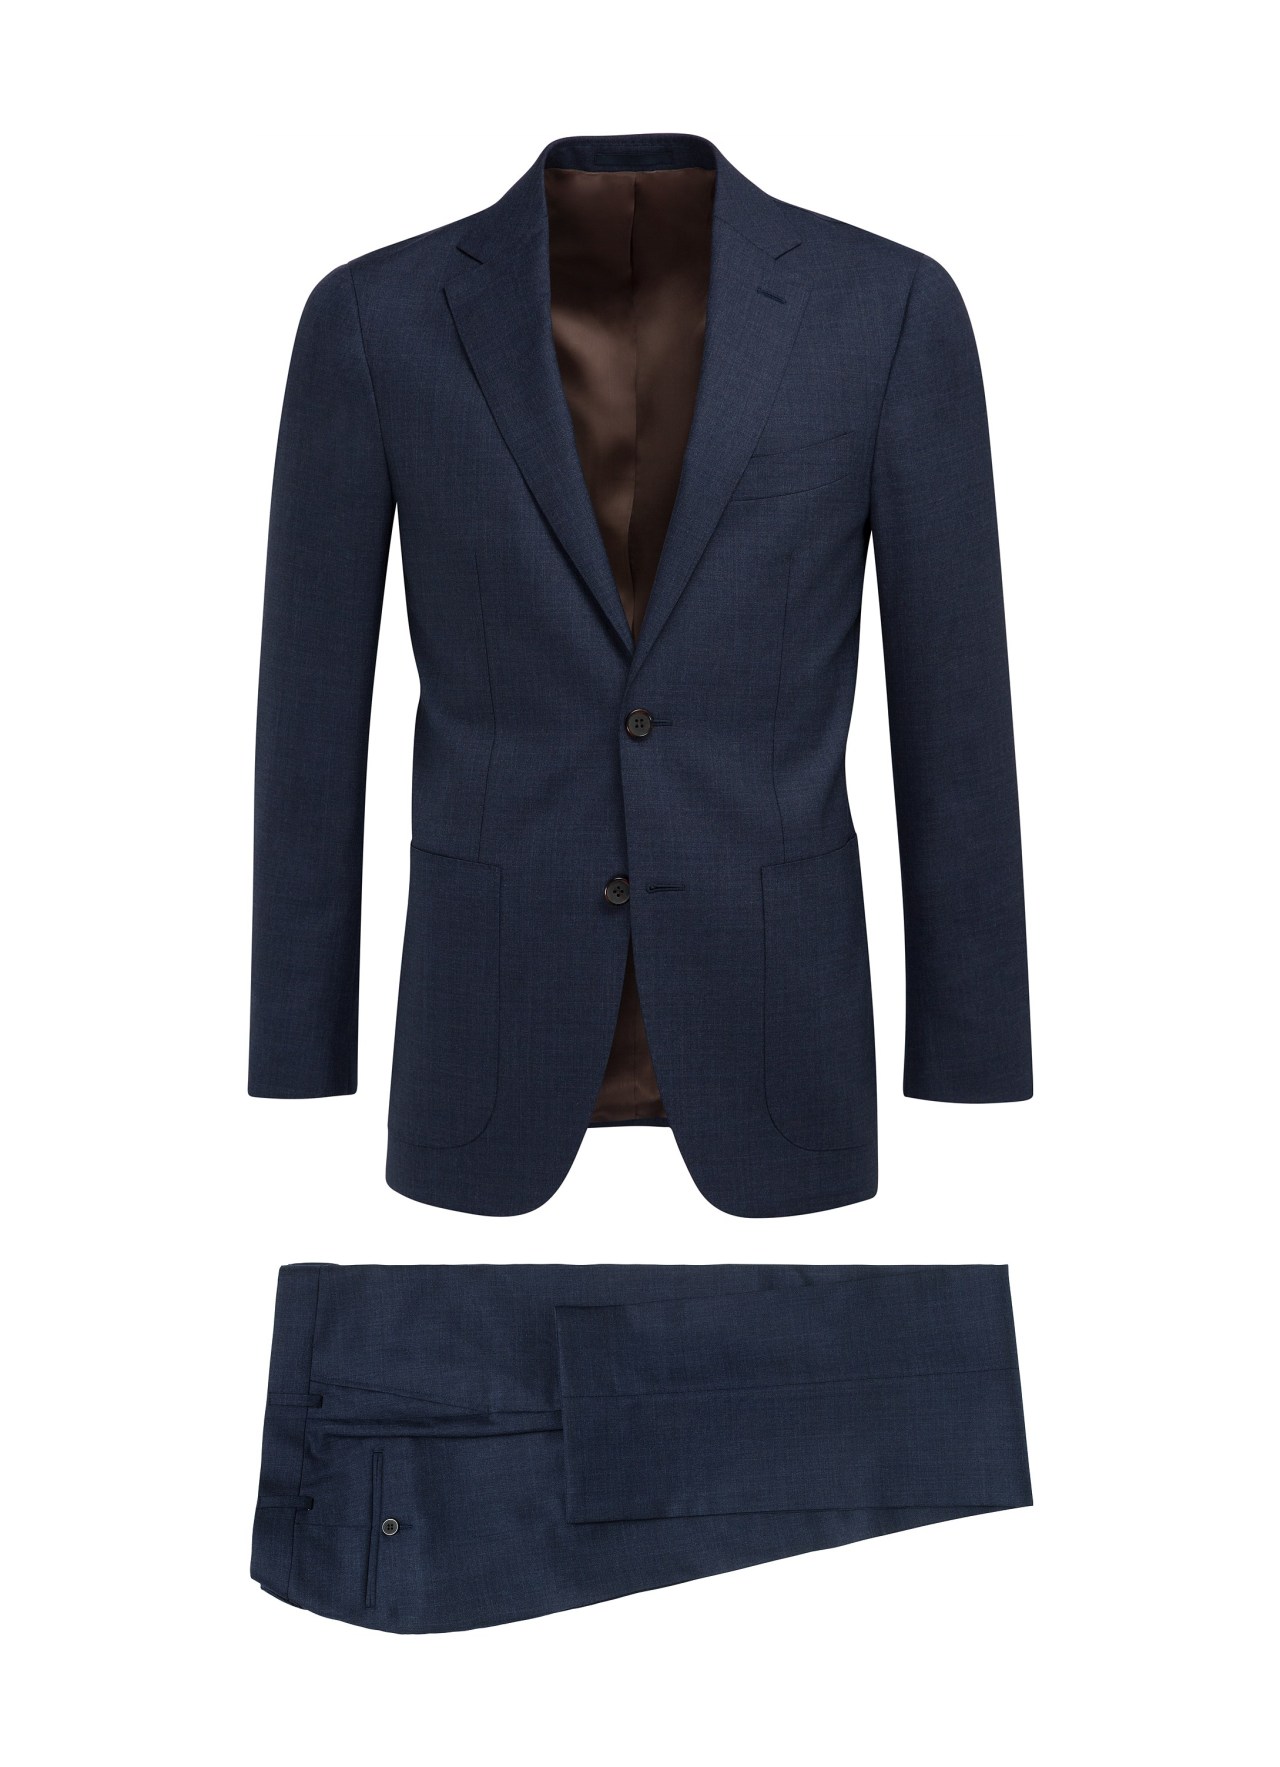 Affordable DoubleDuty Suits